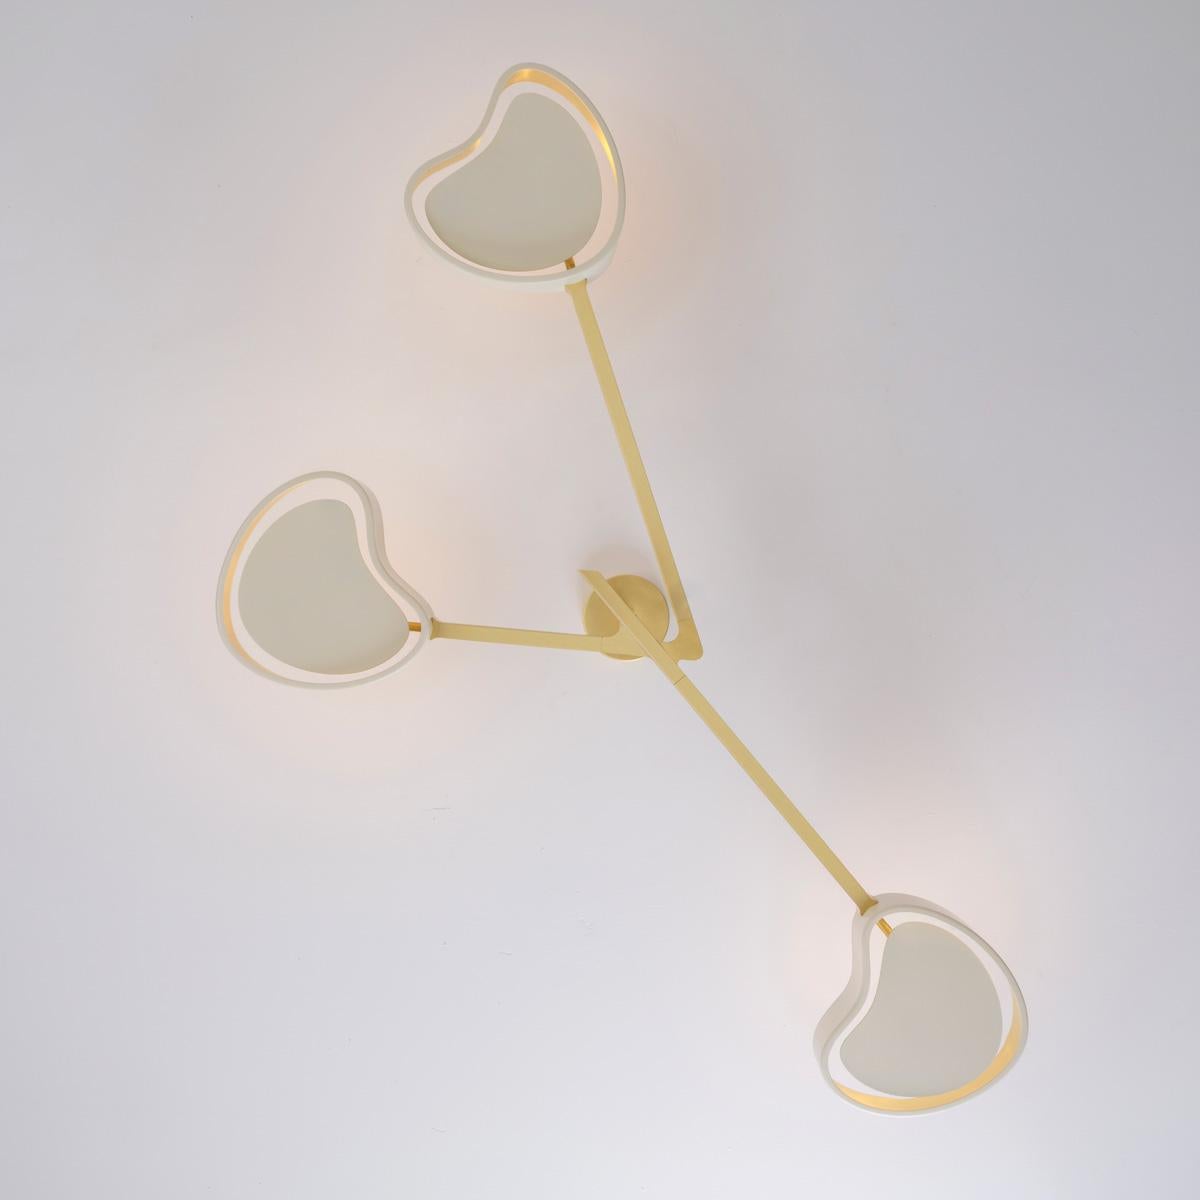 Cuore N.3 Ceiling Light by Gaspare Asaro. Polished Brass Finish For Sale 2